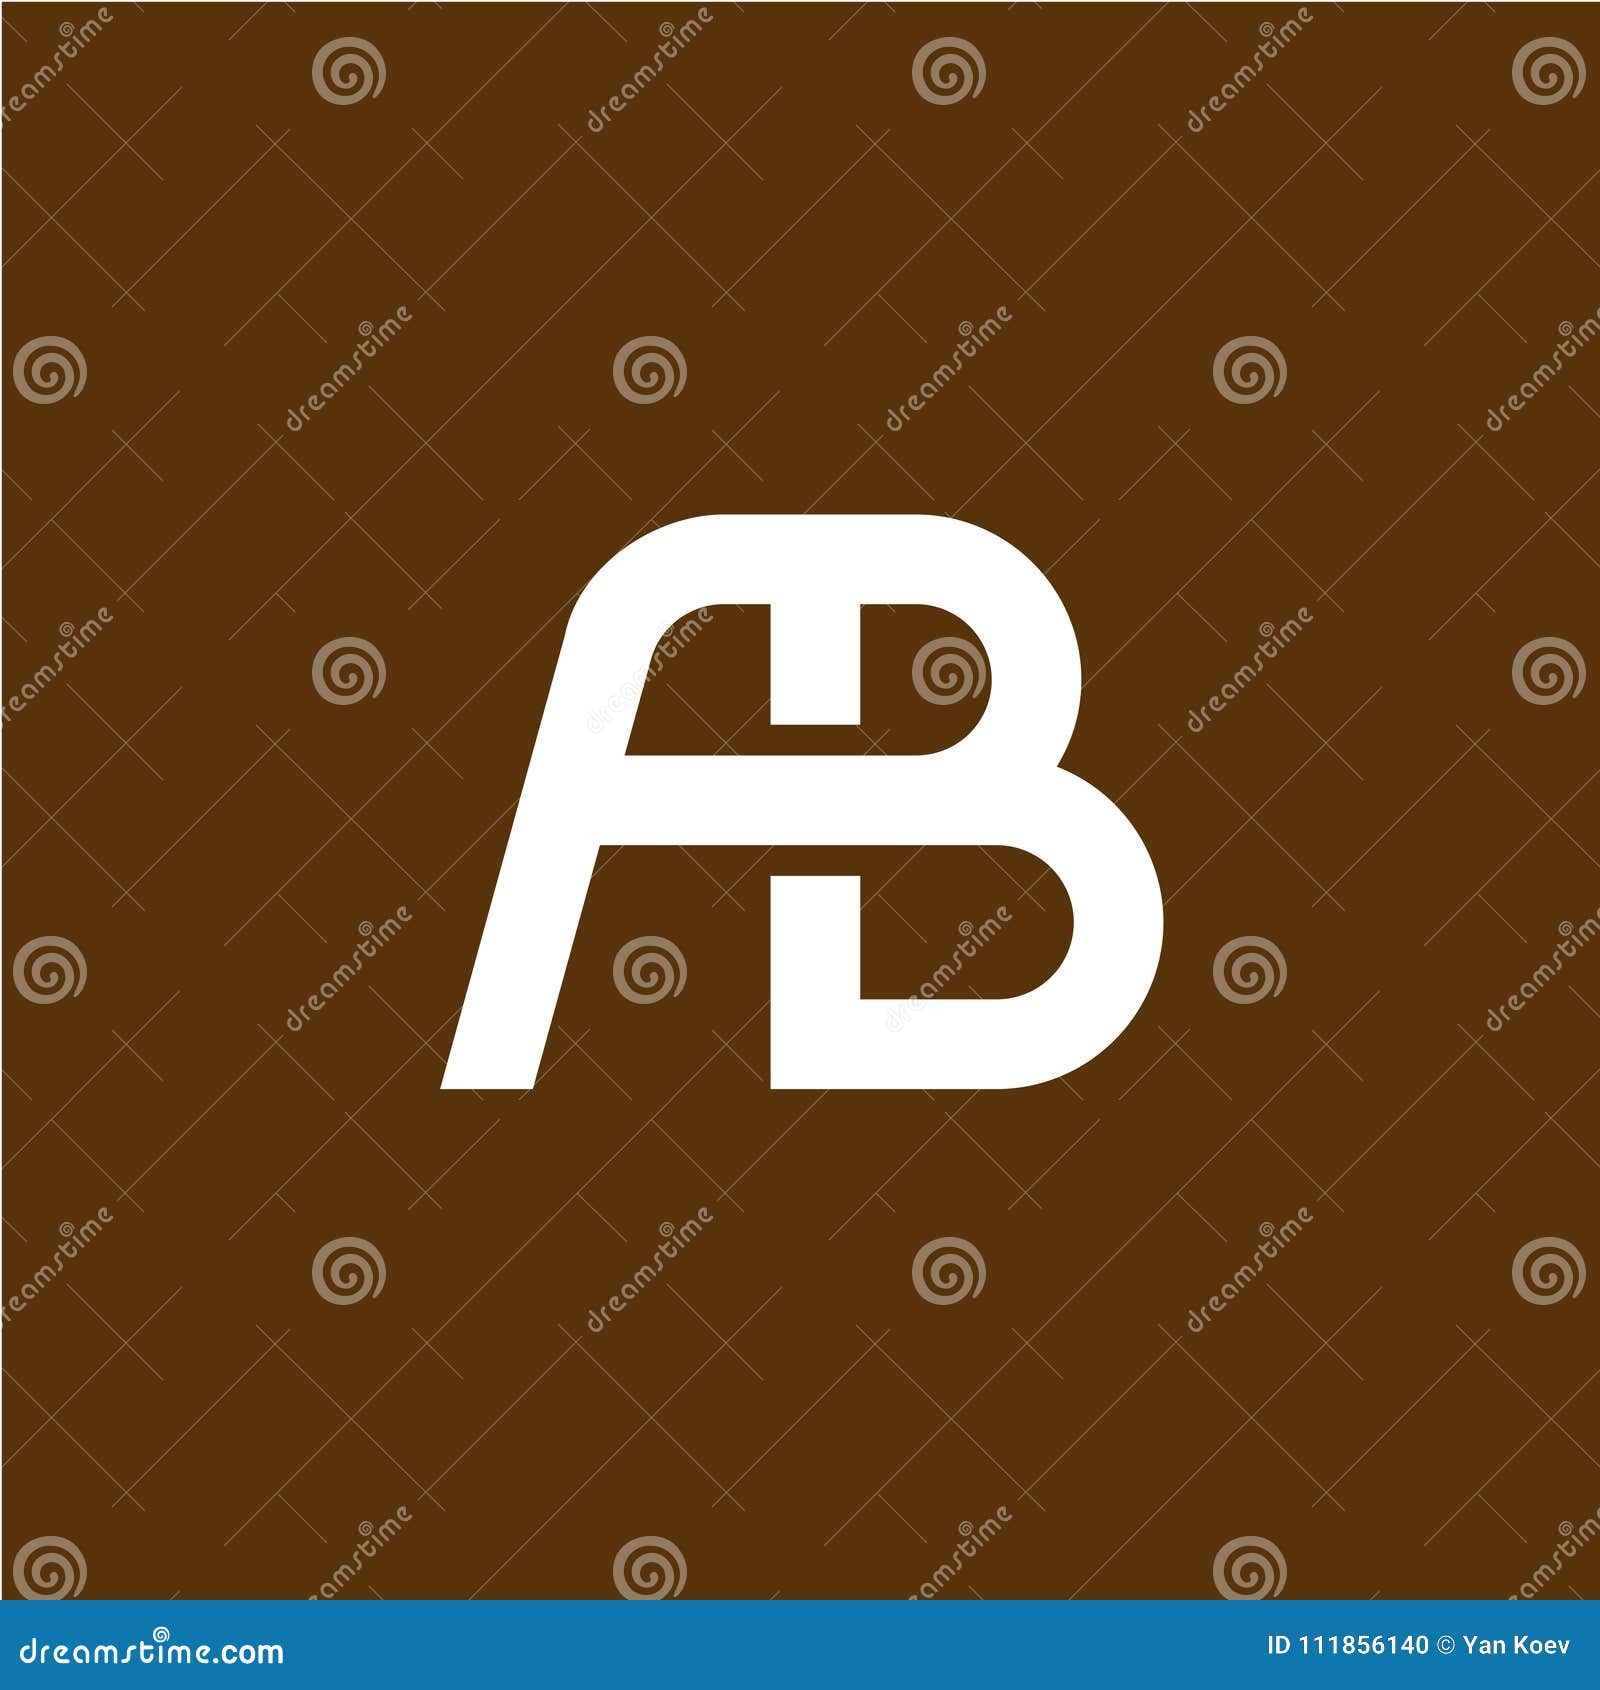 two letters a and b ligature logo